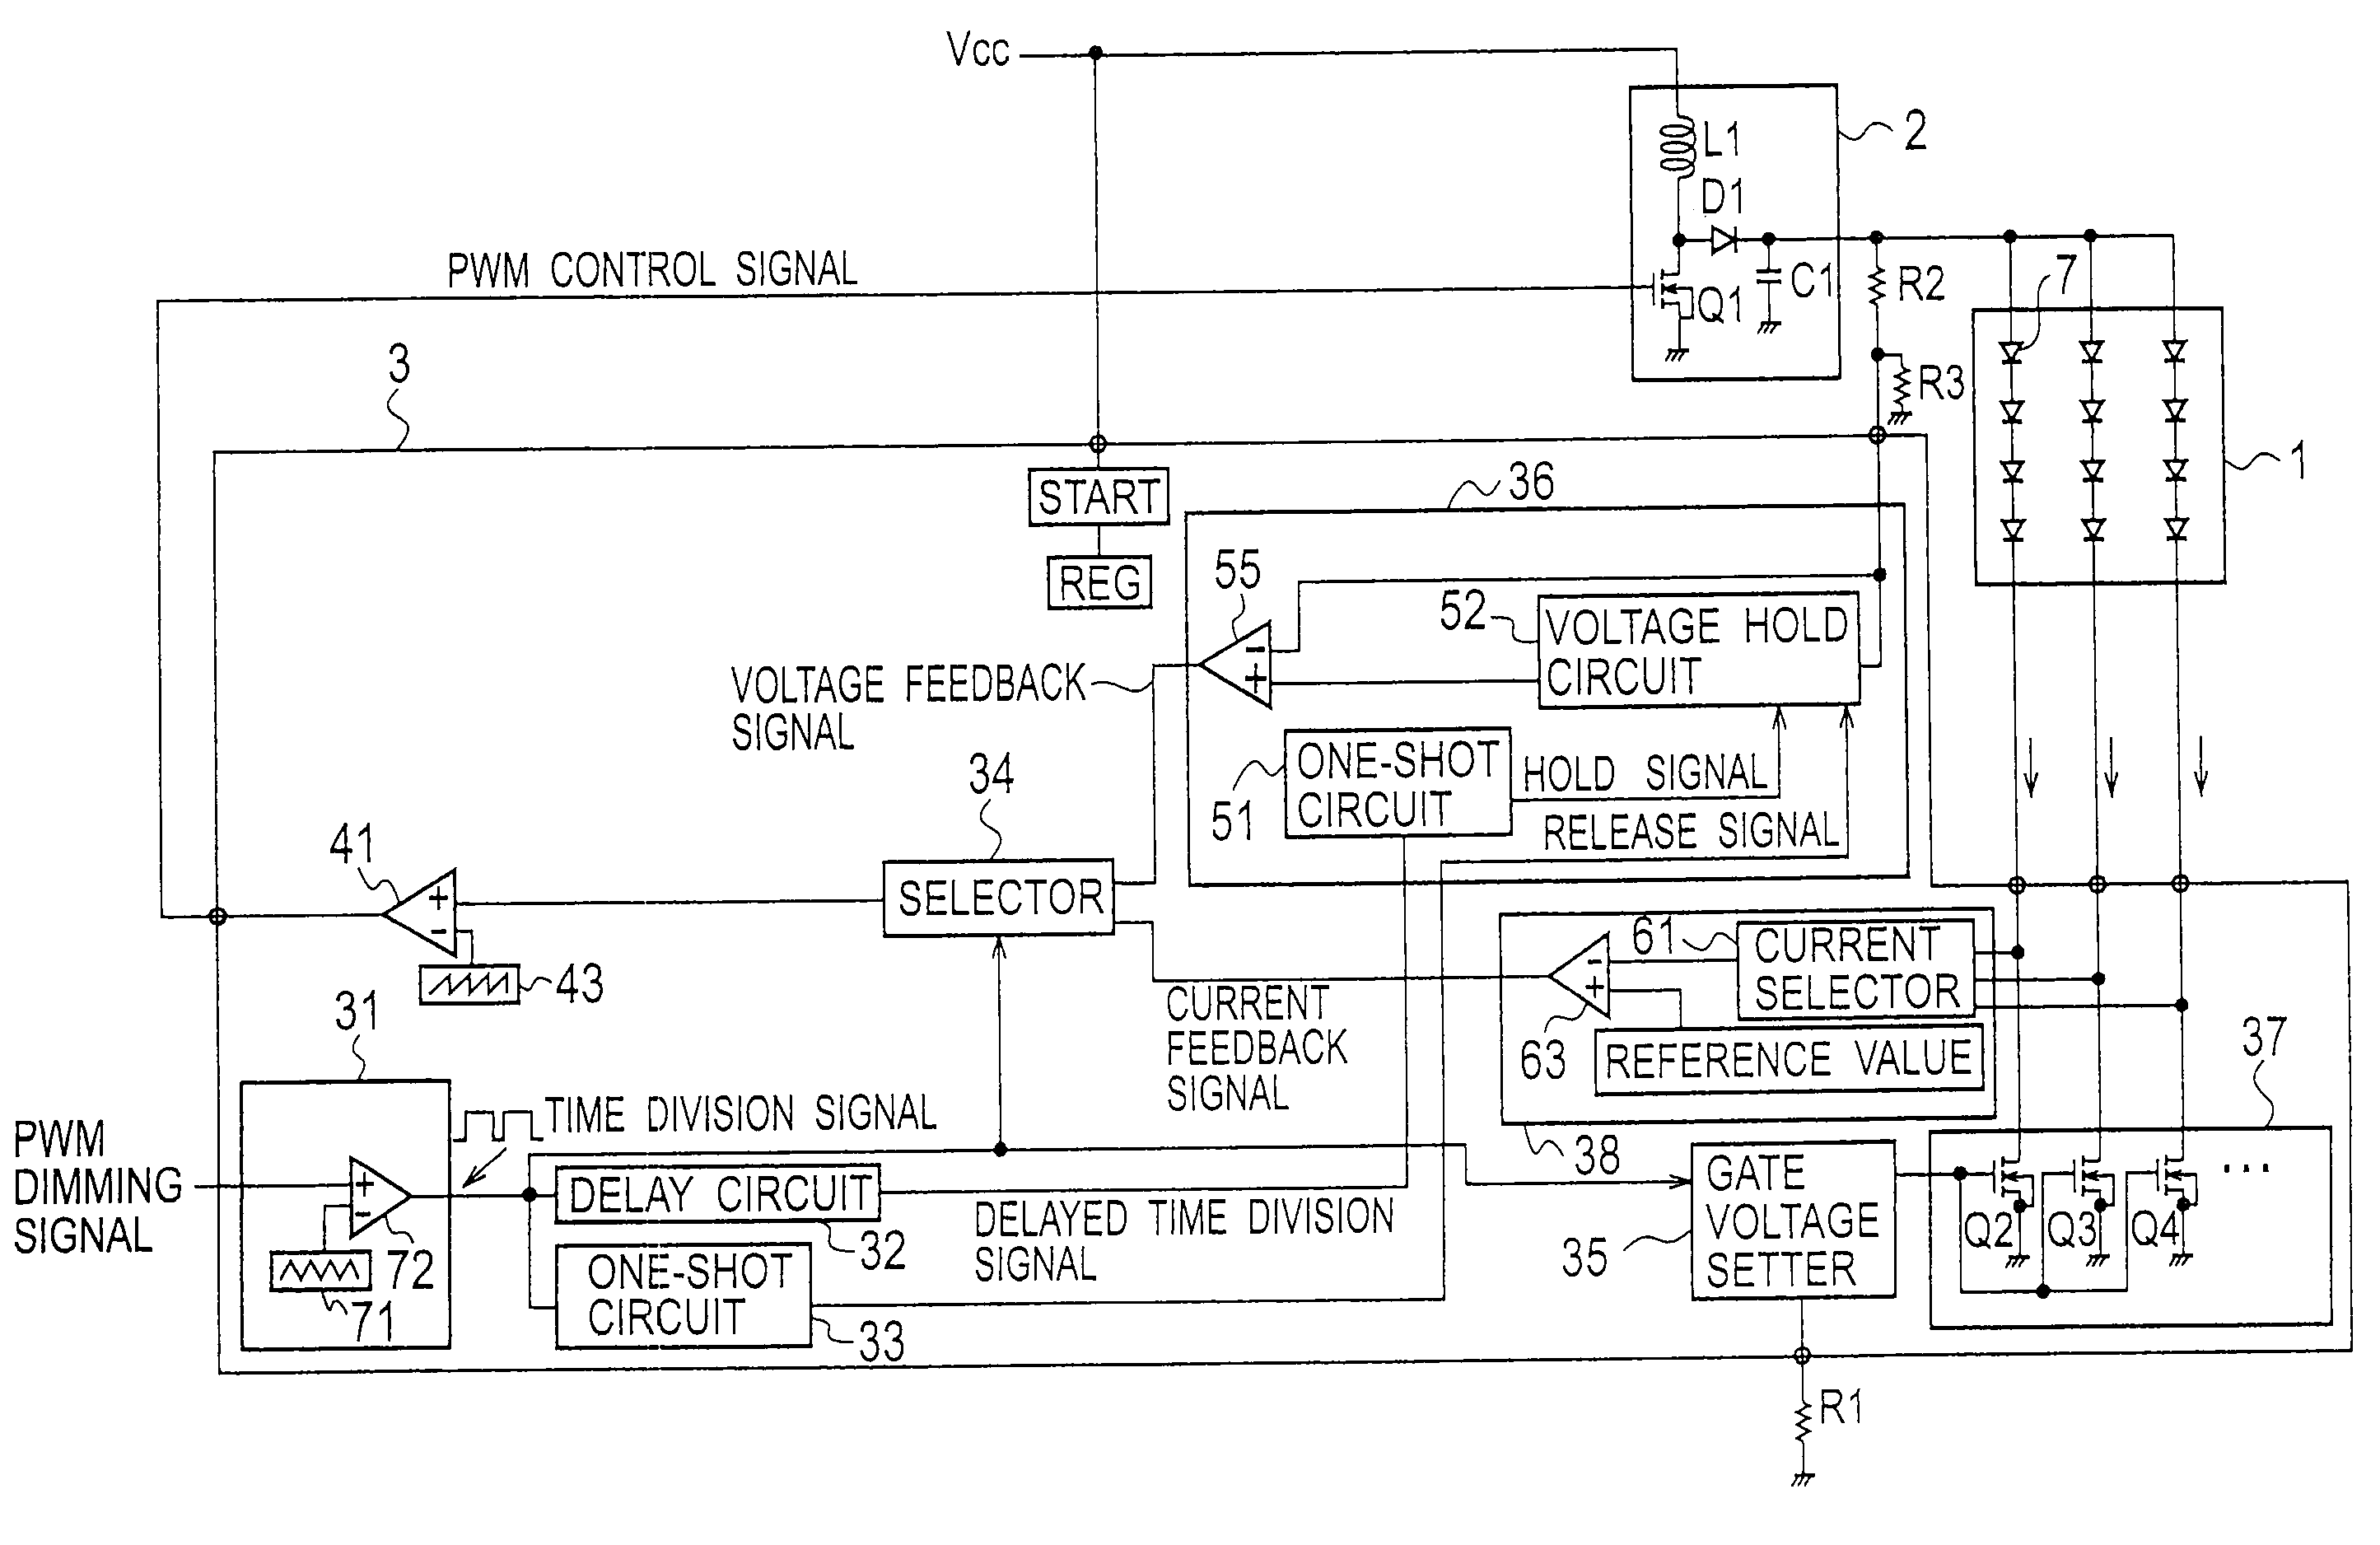 Apparatus for lighting leds